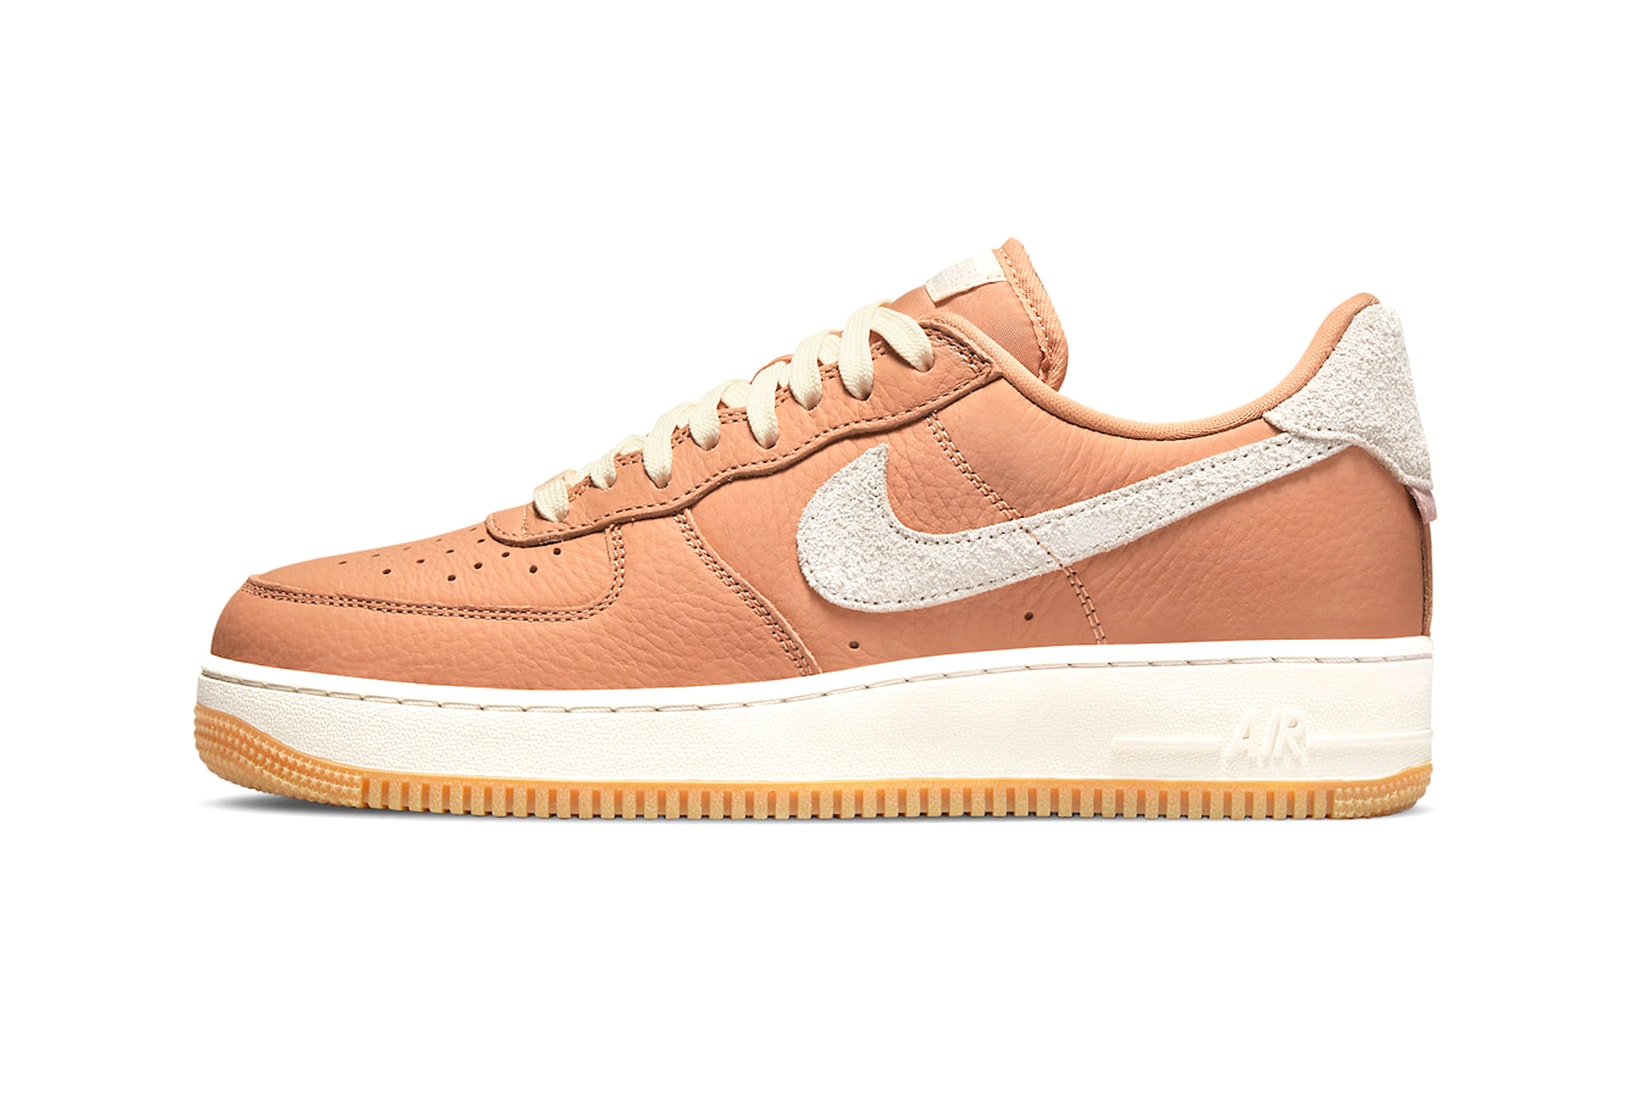 Nike Air Force 1 Craft Sneakers Beige Gum Price Release Date Lateral View